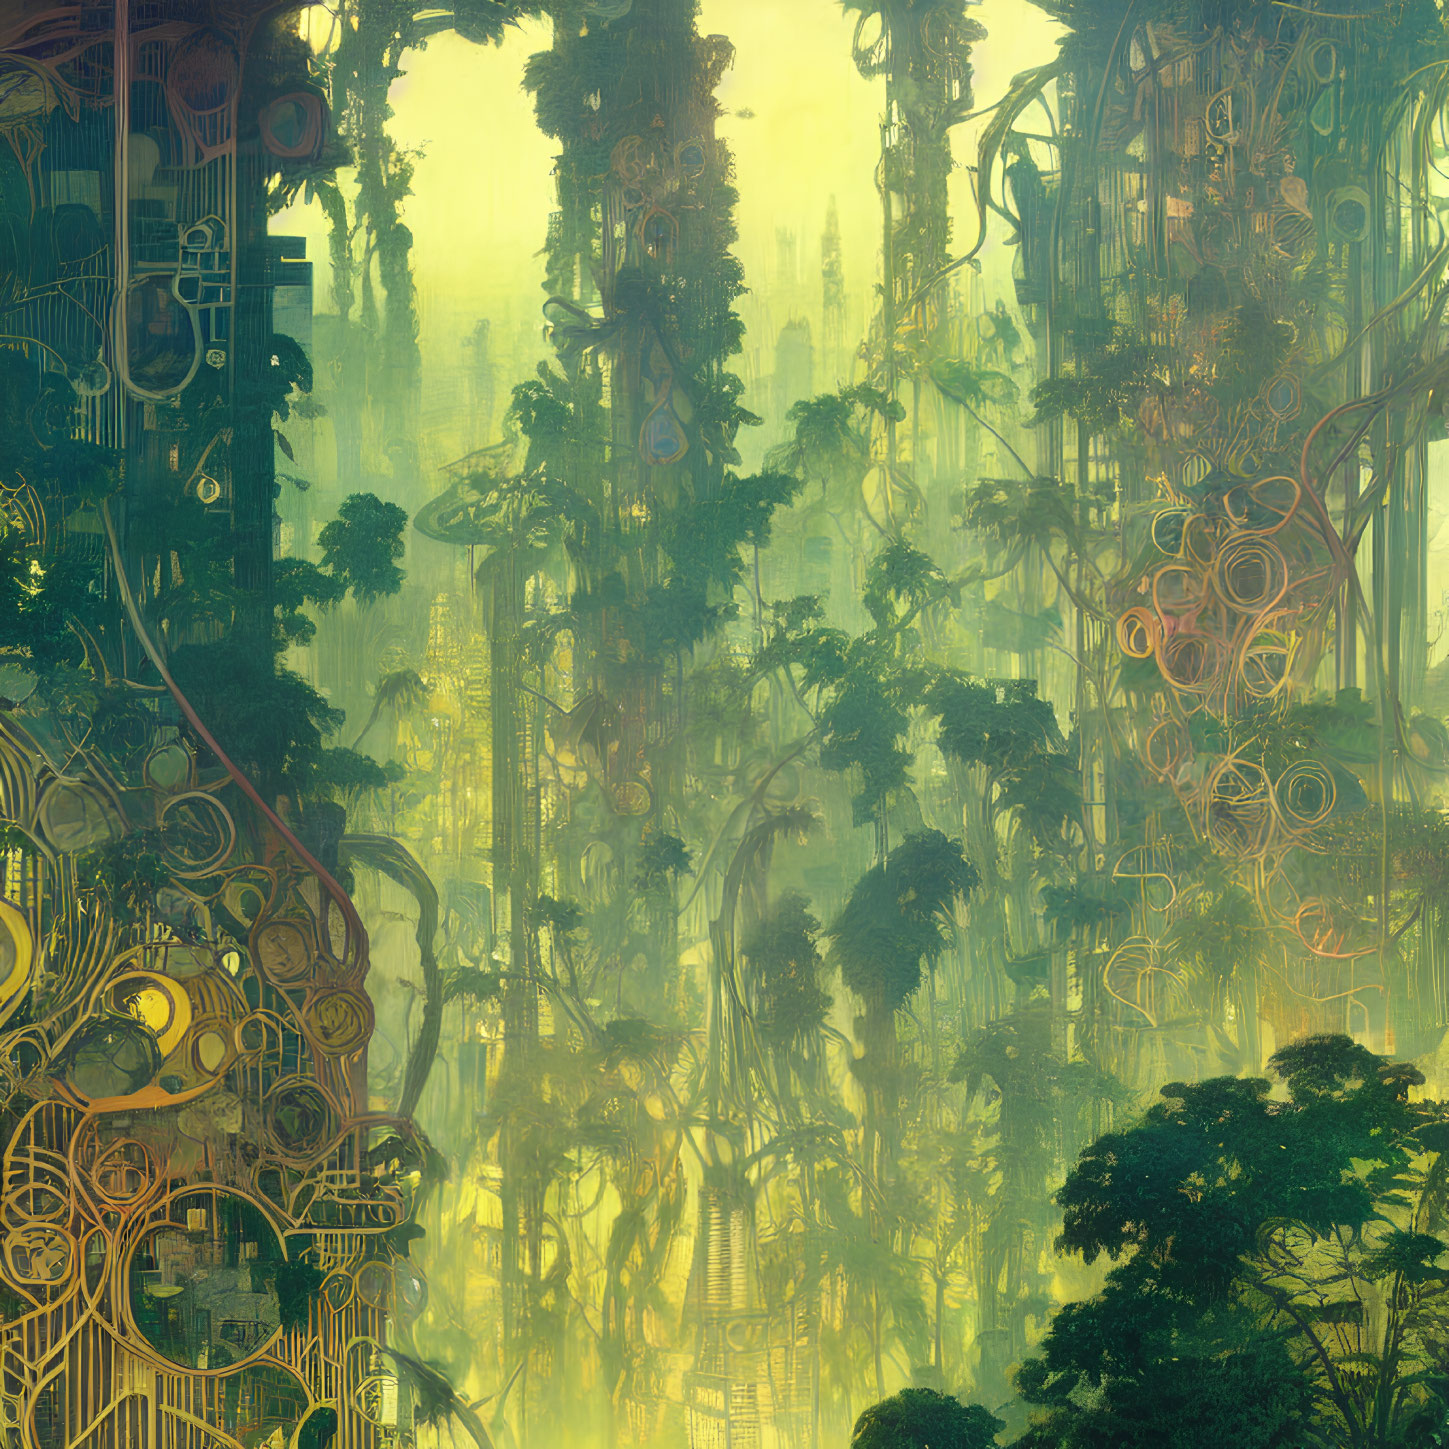 Fantastical forest with organic and mechanical blend in misty atmosphere